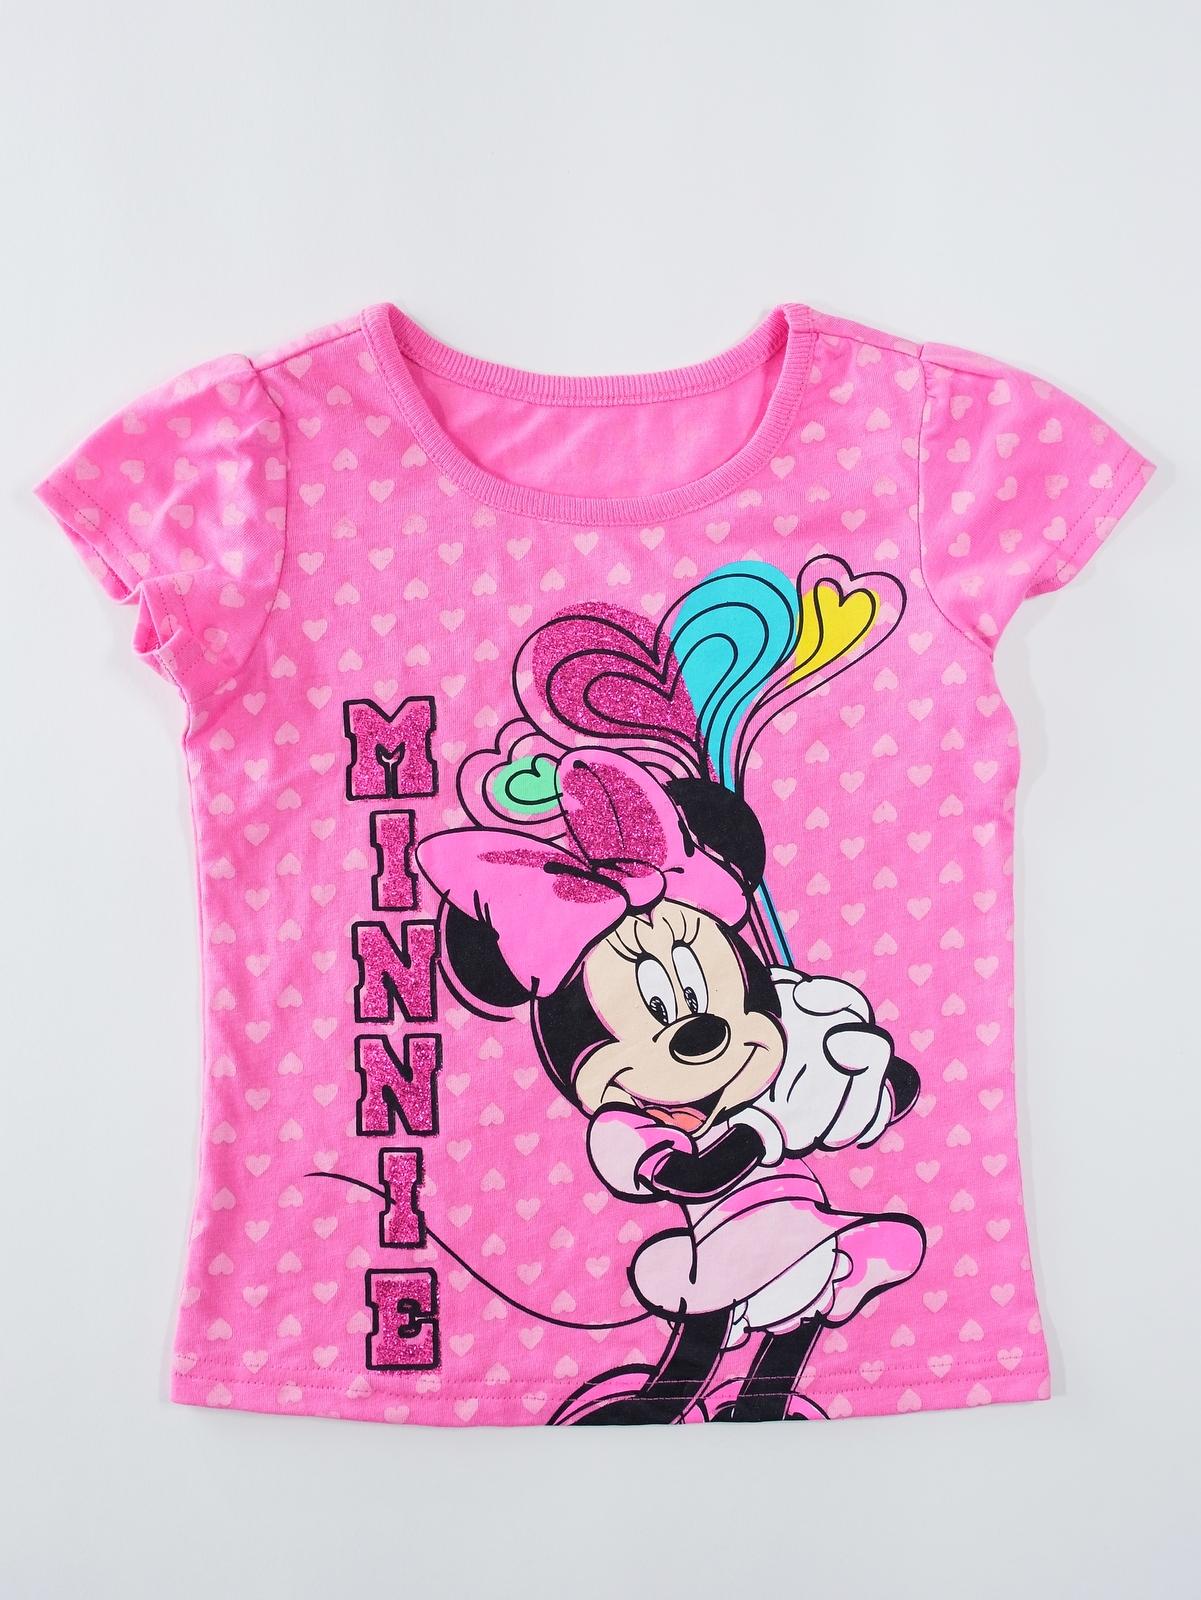 Disney Minnie Mouse Toddler Girl's Graphic T-Shirt - Glittered